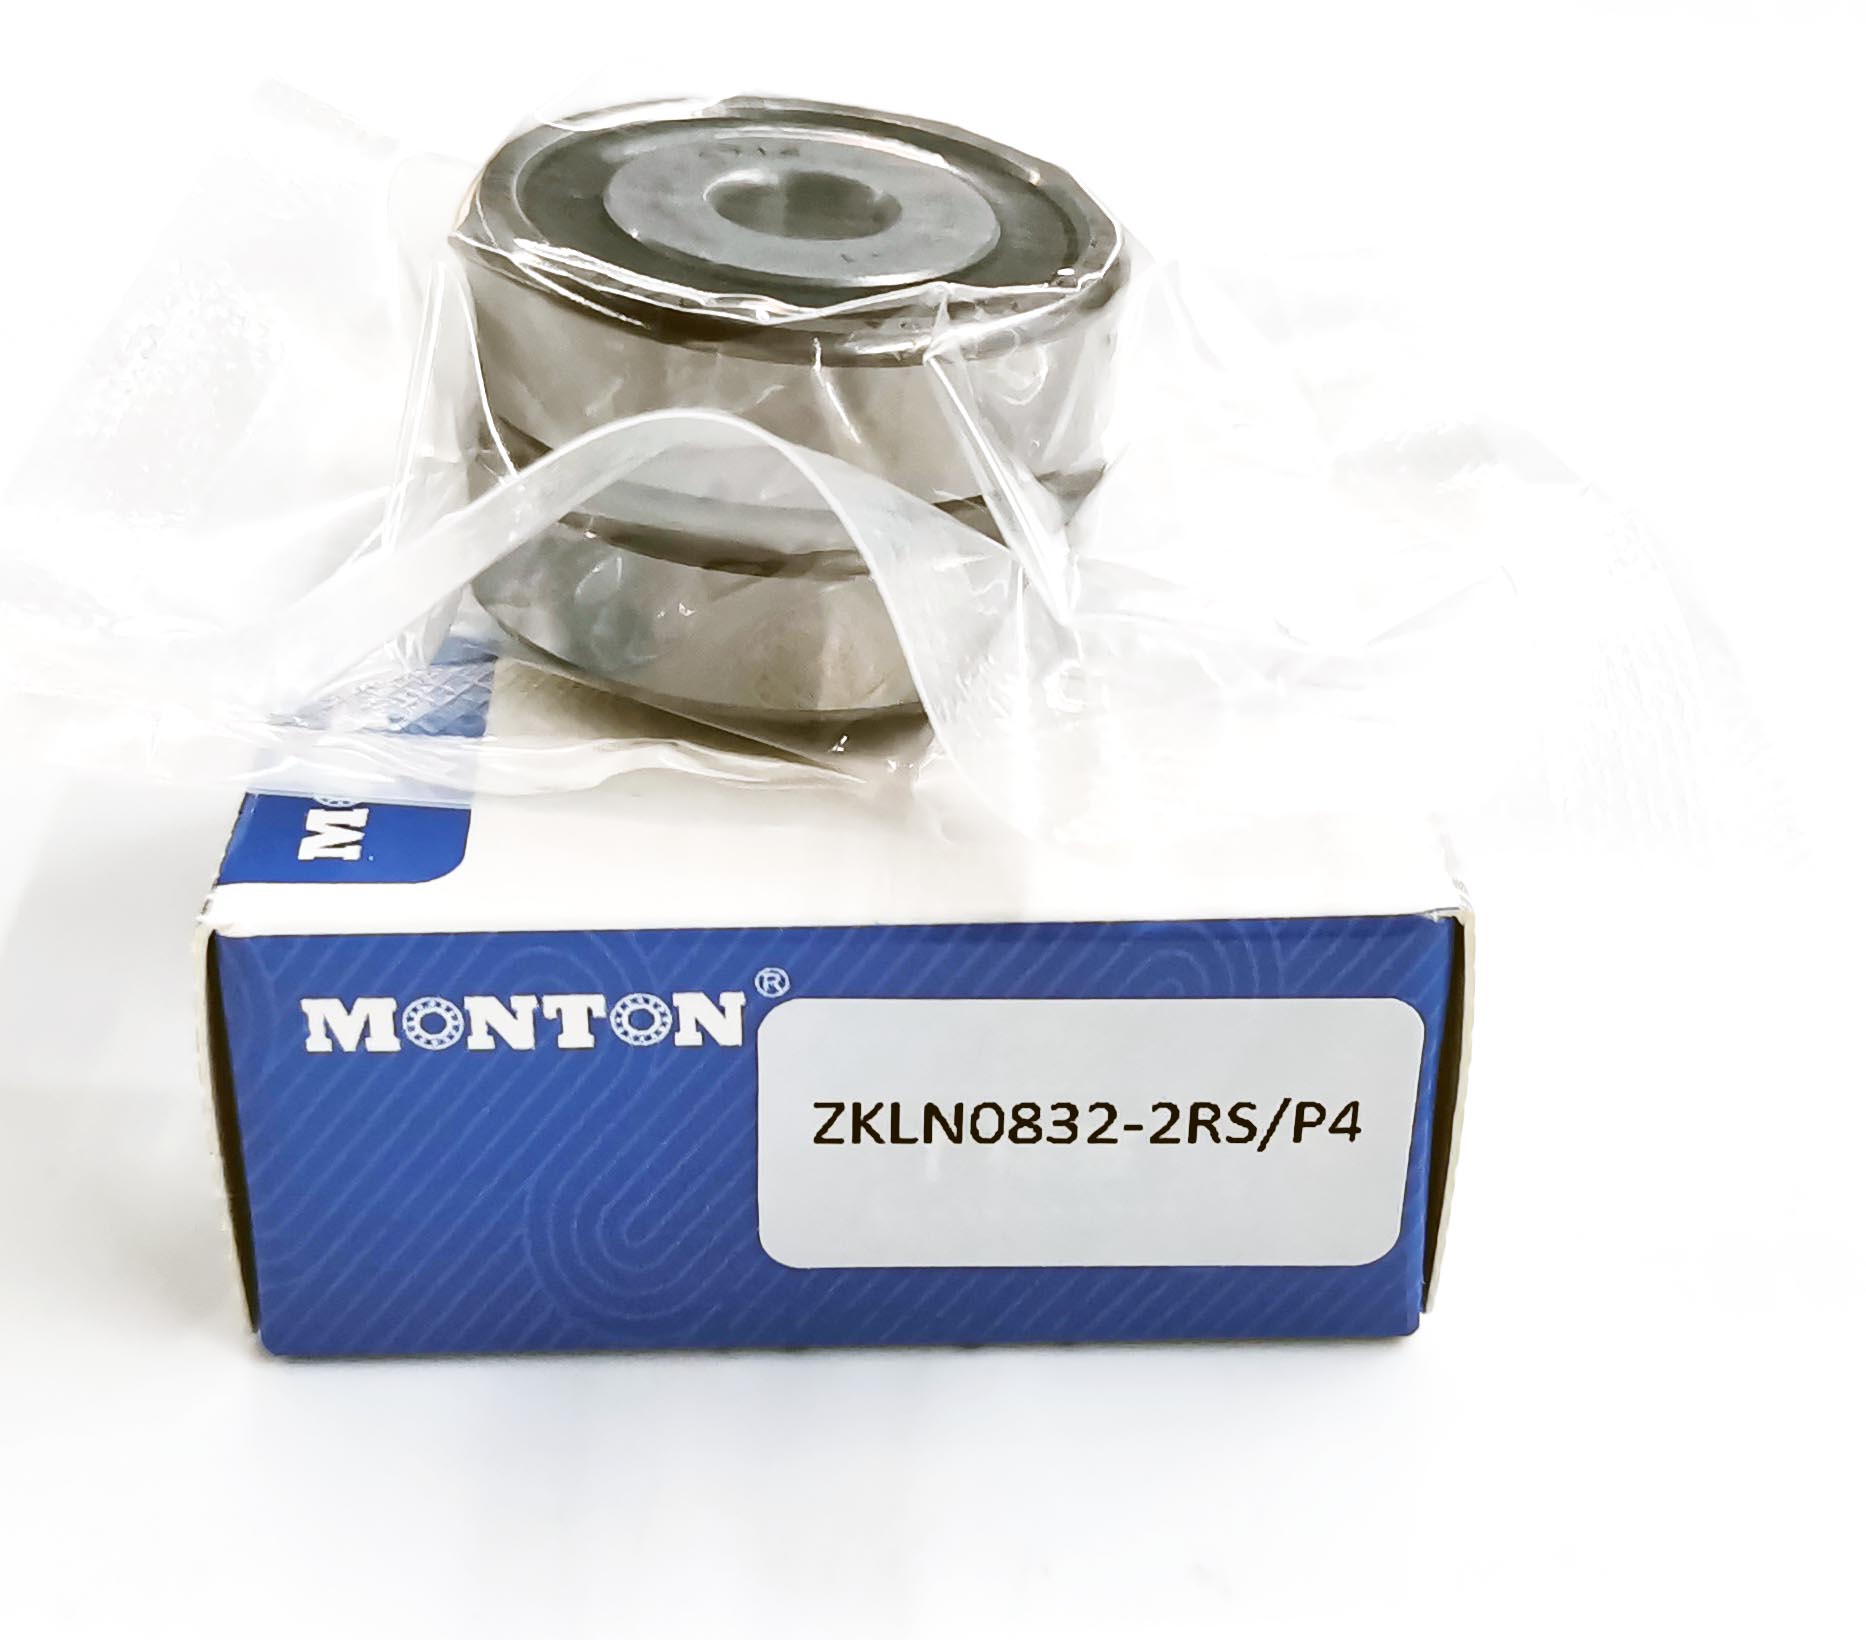 ZKLN0832-2RS-XL Axial angular contact ball bearings for high speed spindle